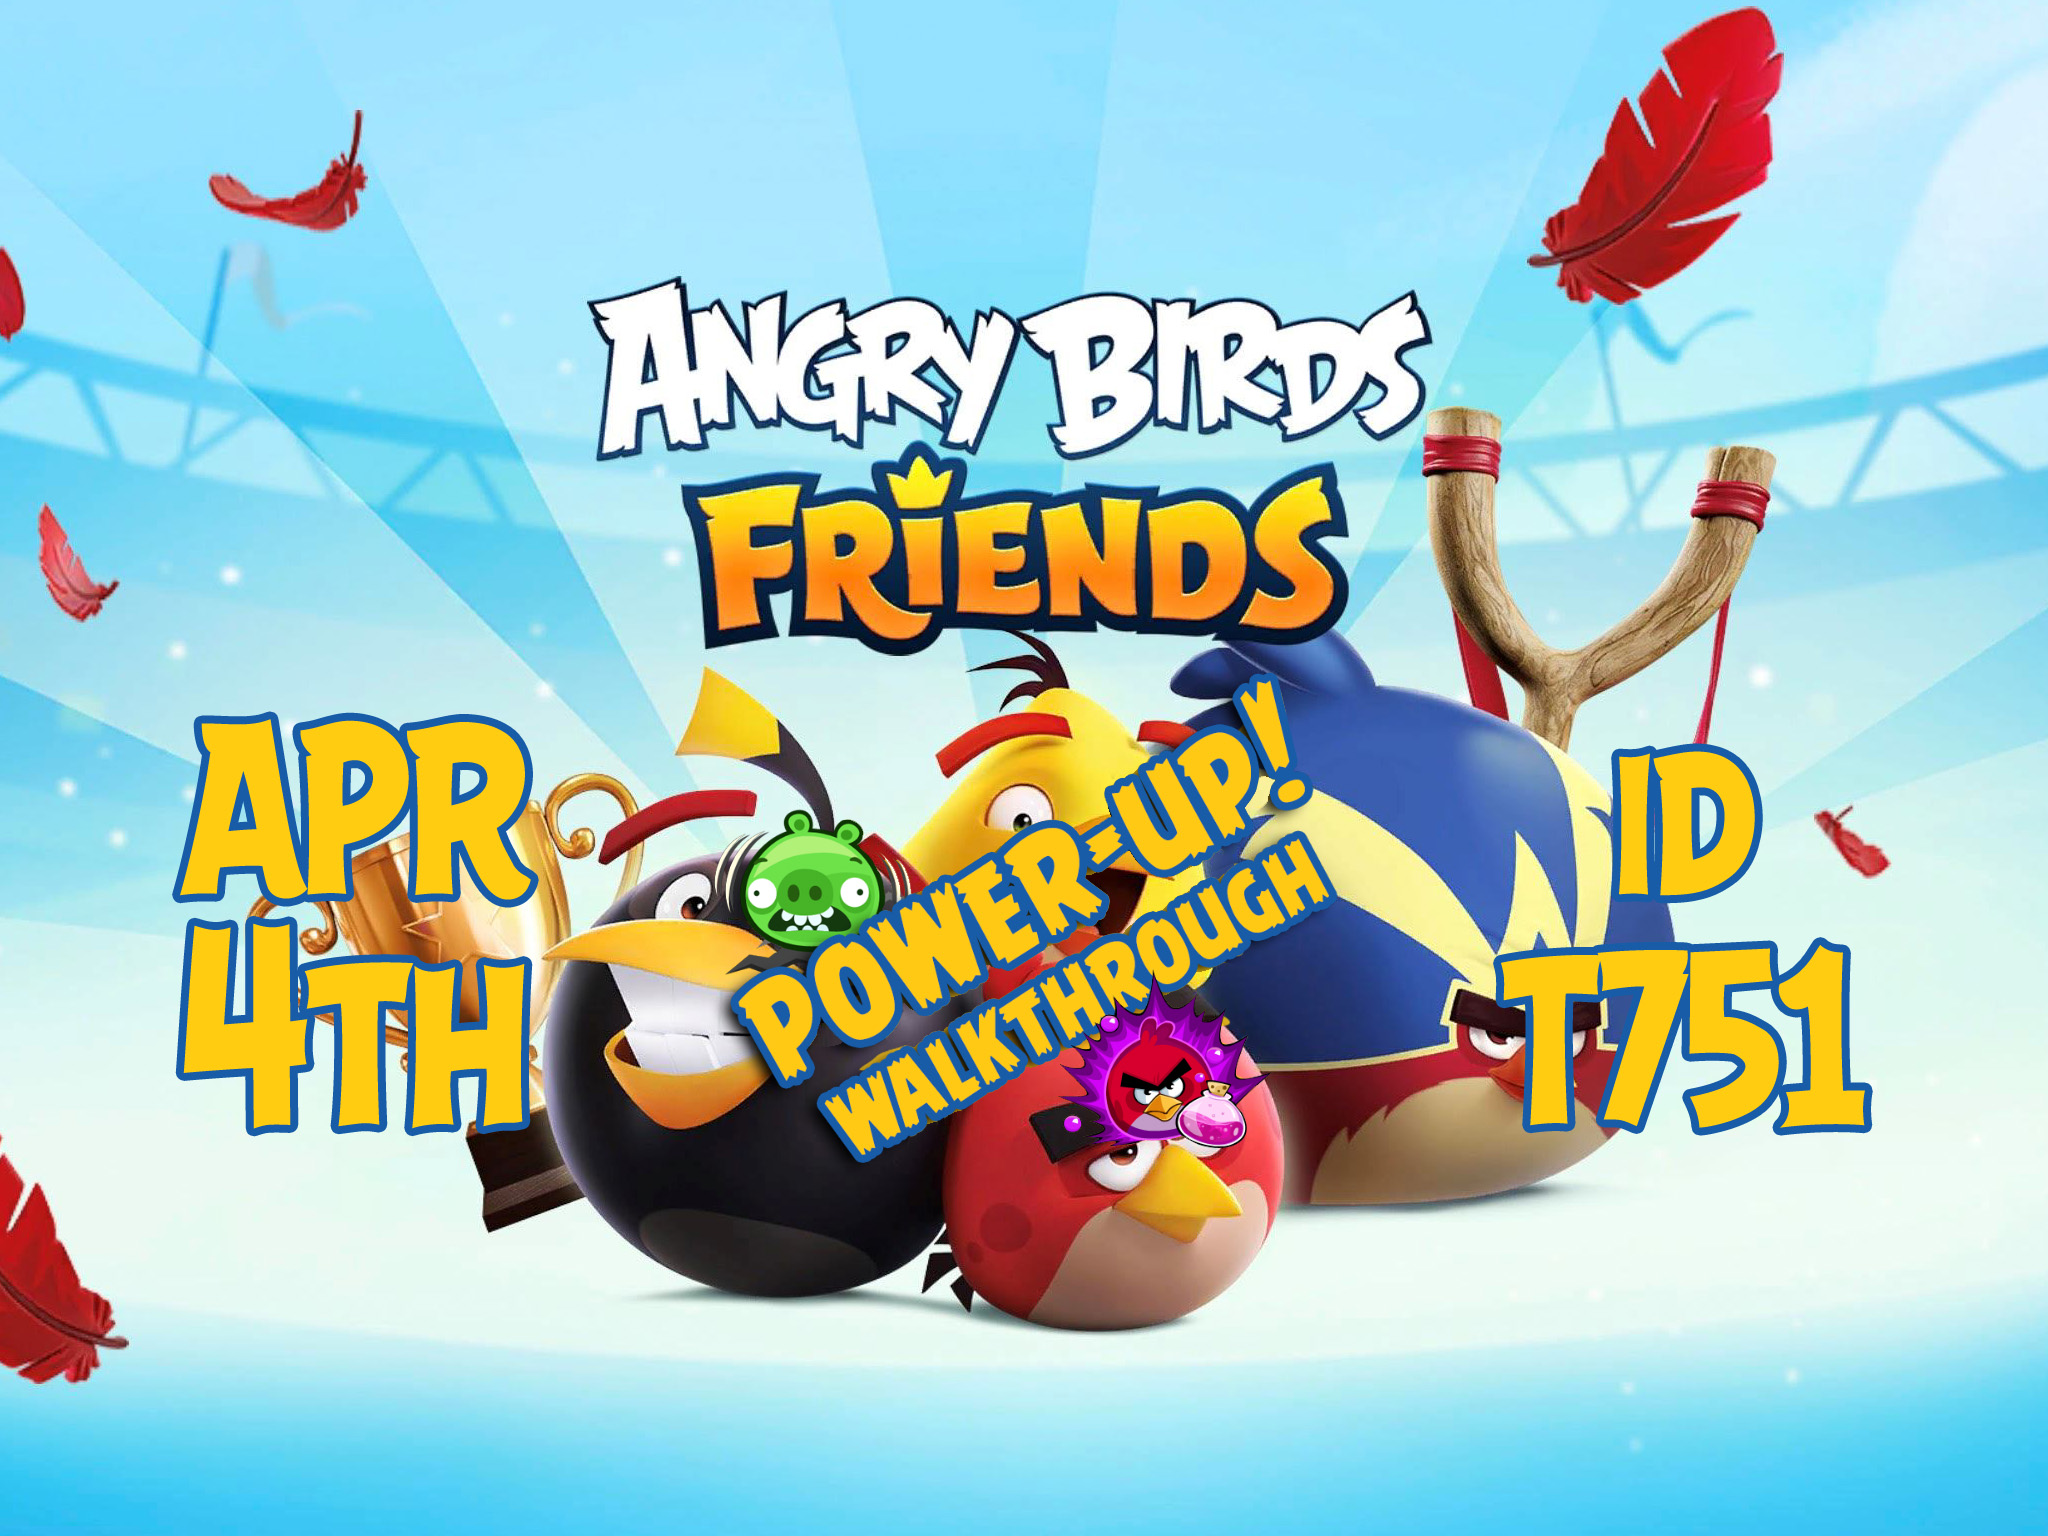 Angry-Birds-Friends-Tournament-T751-Feature-Image-PU